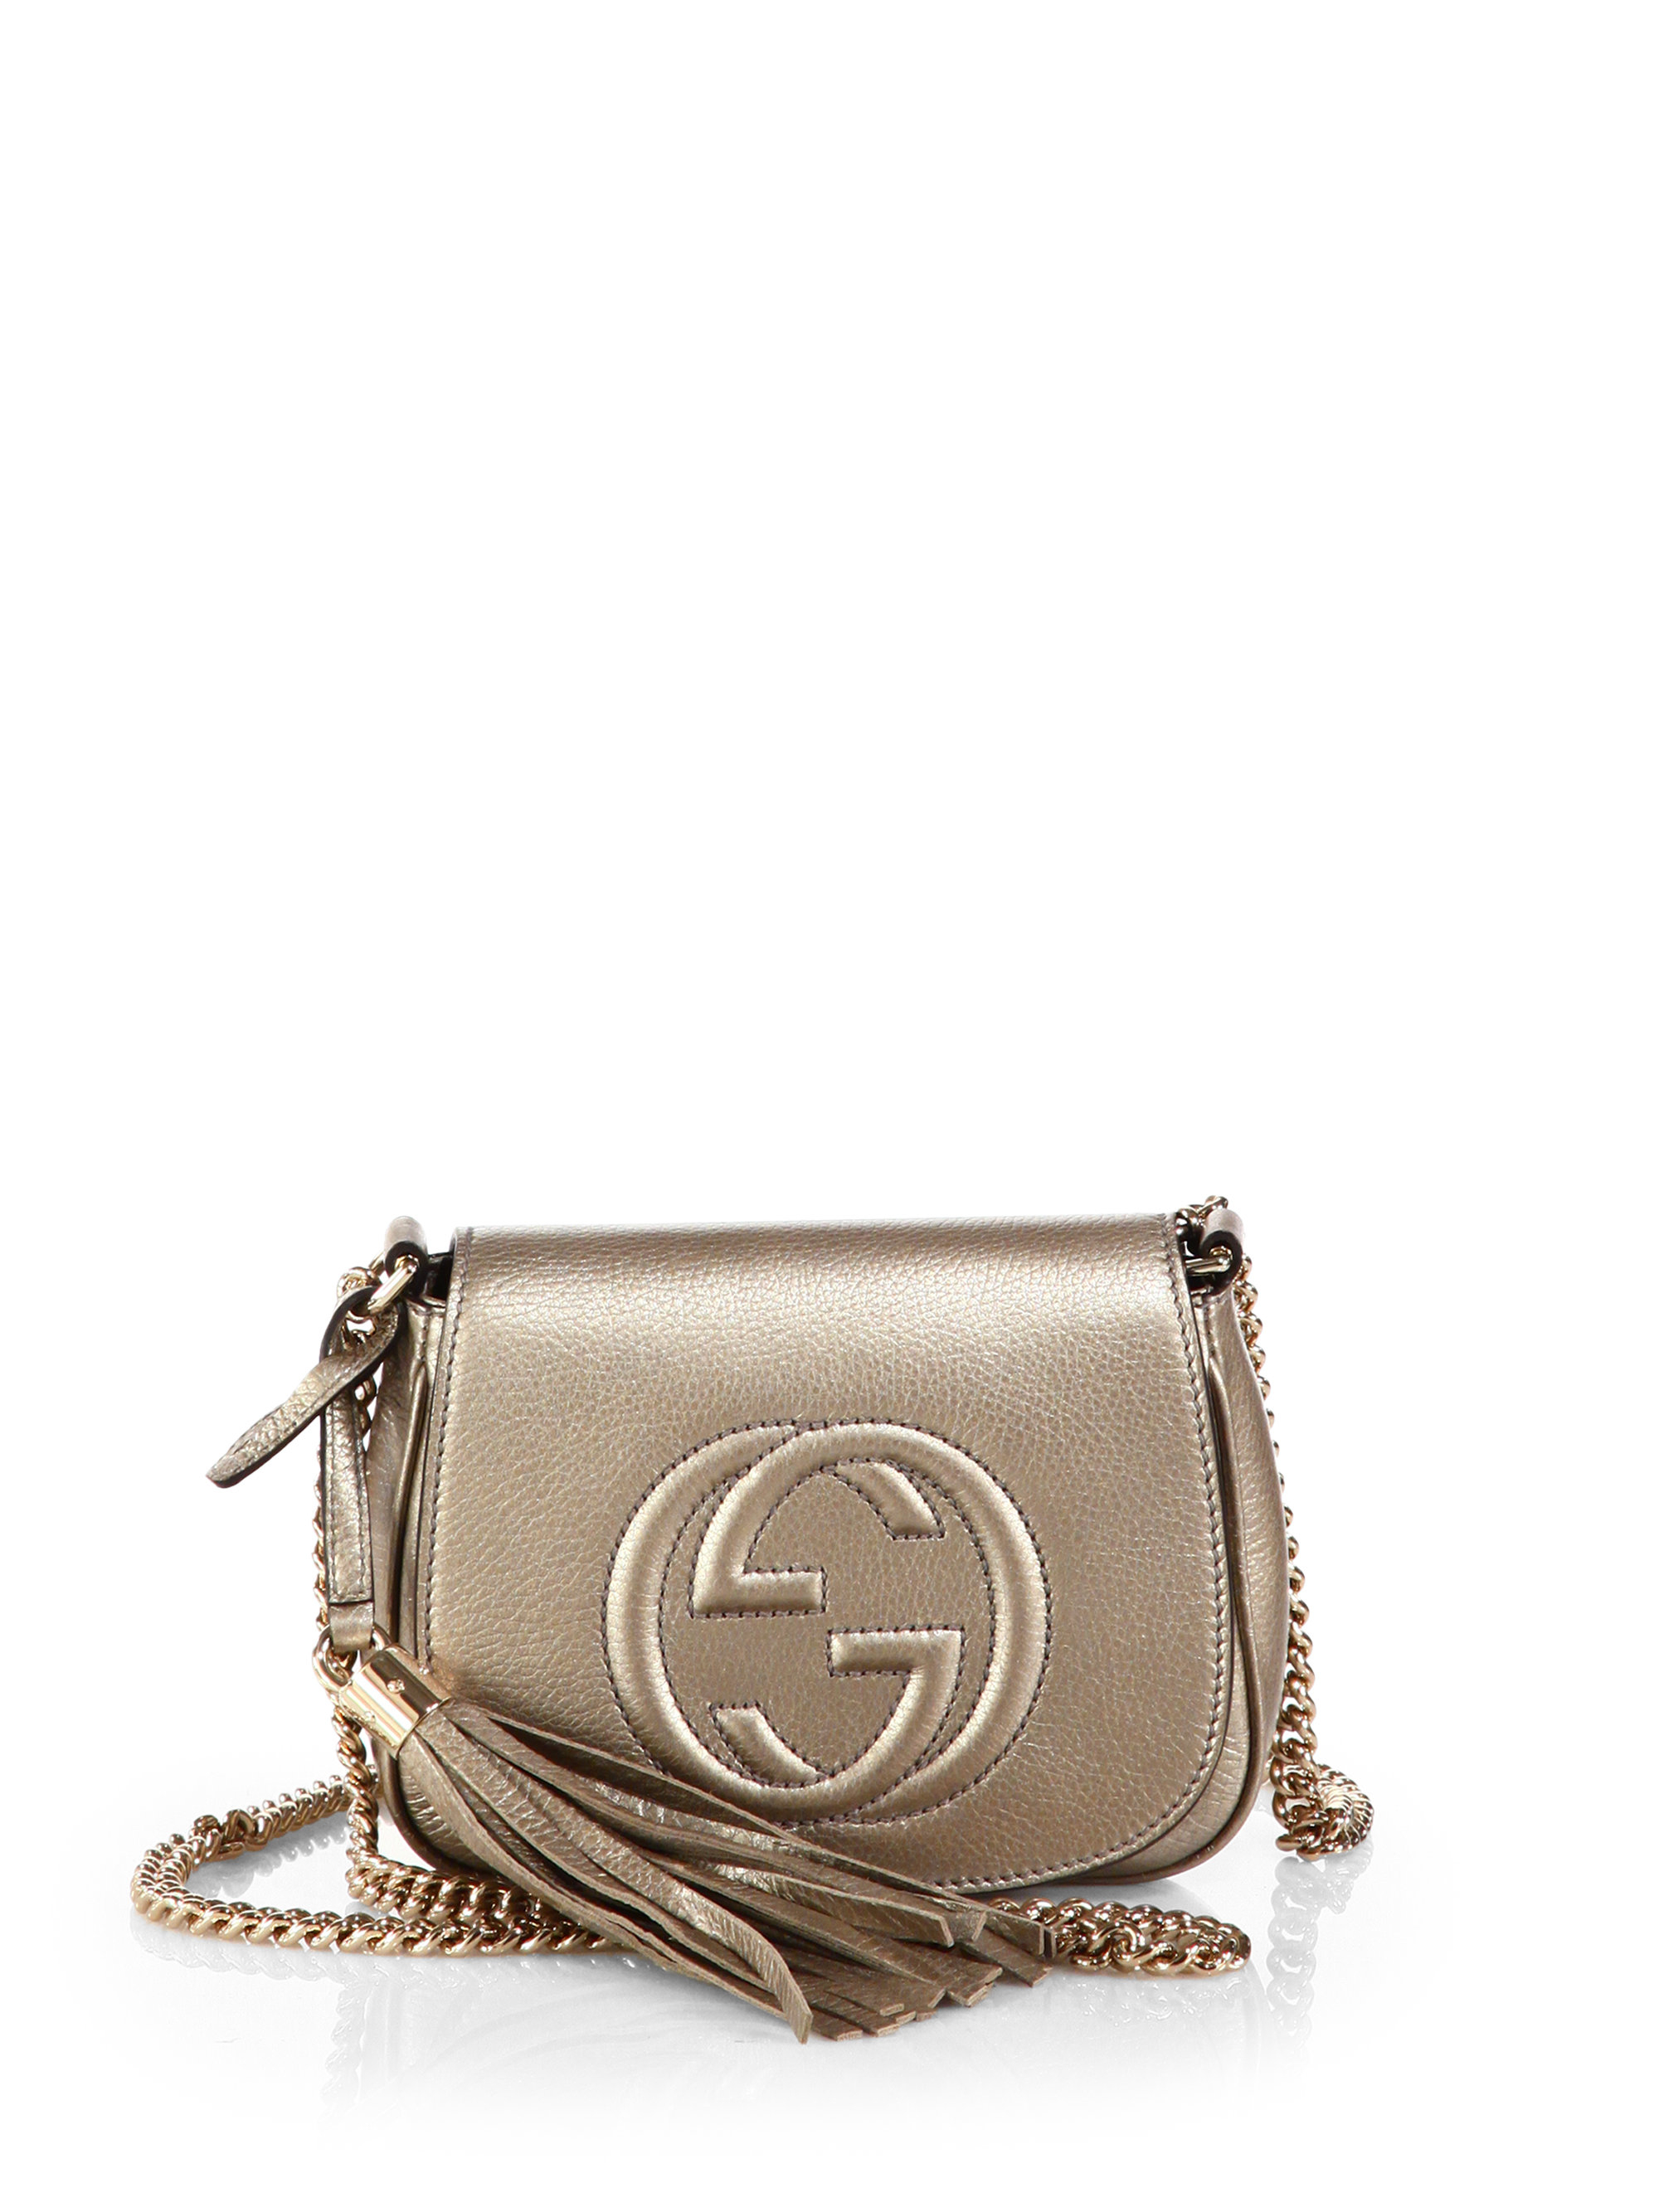 Gucci Soho Metallic Leather Shoulder Bag in Gold (CHAMPAGNE) | Lyst